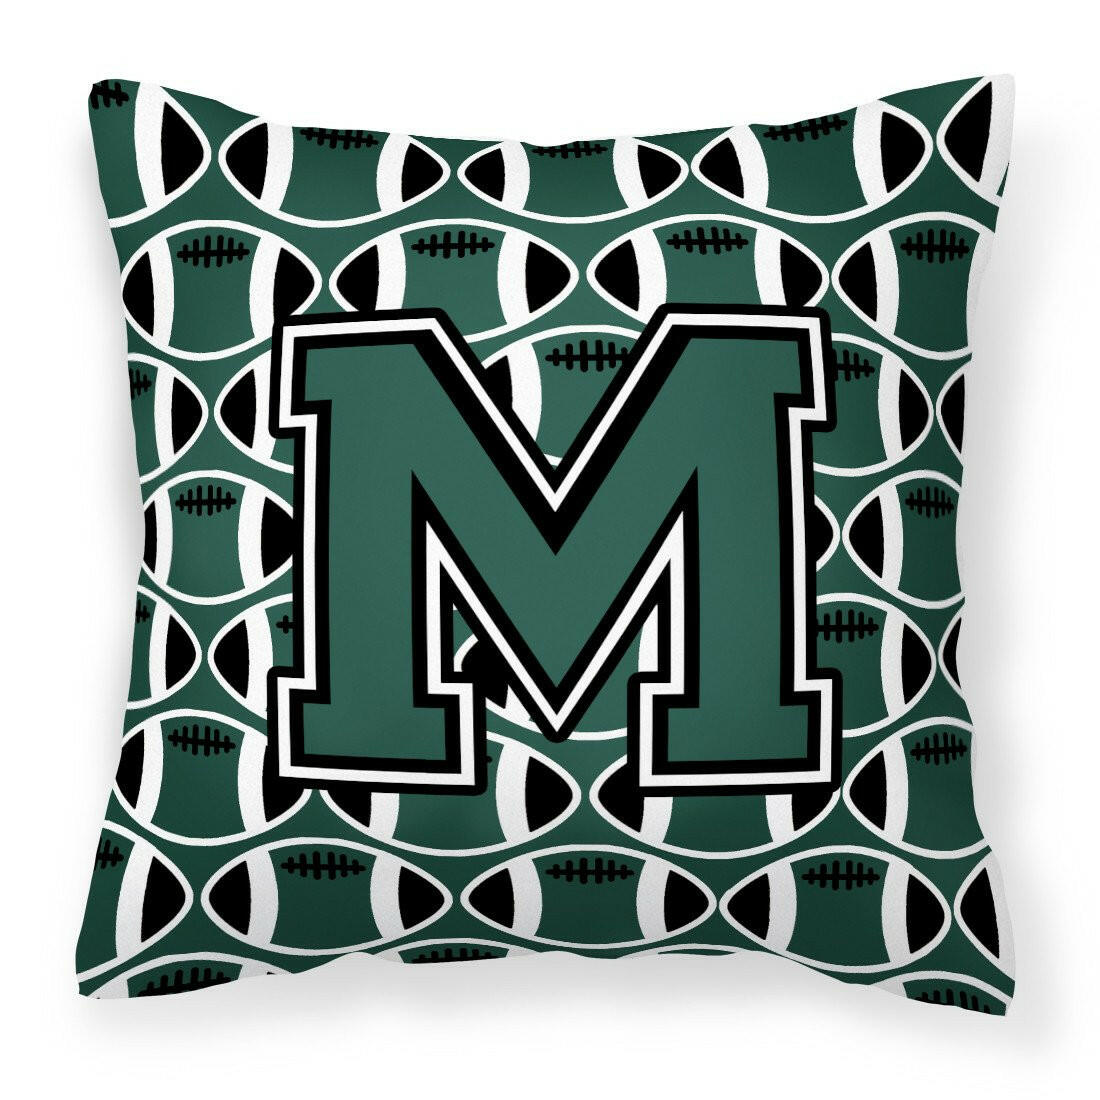 Letter M Football Green and White Fabric Decorative Pillow CJ1071-MPW1414 by Caroline's Treasures